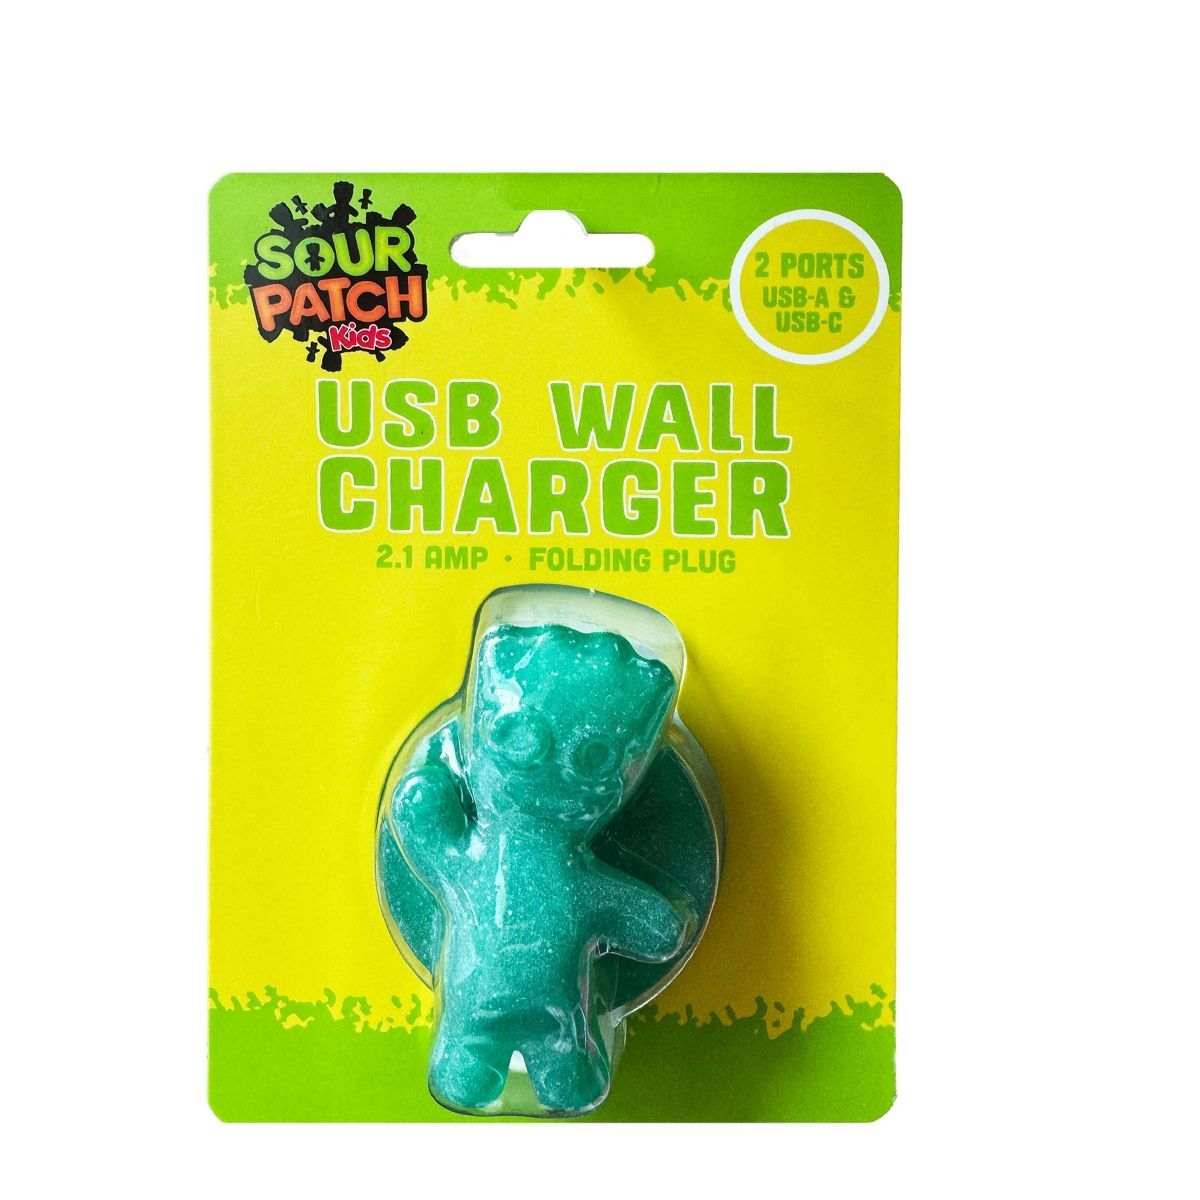 Orbit innovations USB Wall Chargers - Sourpatch | Target